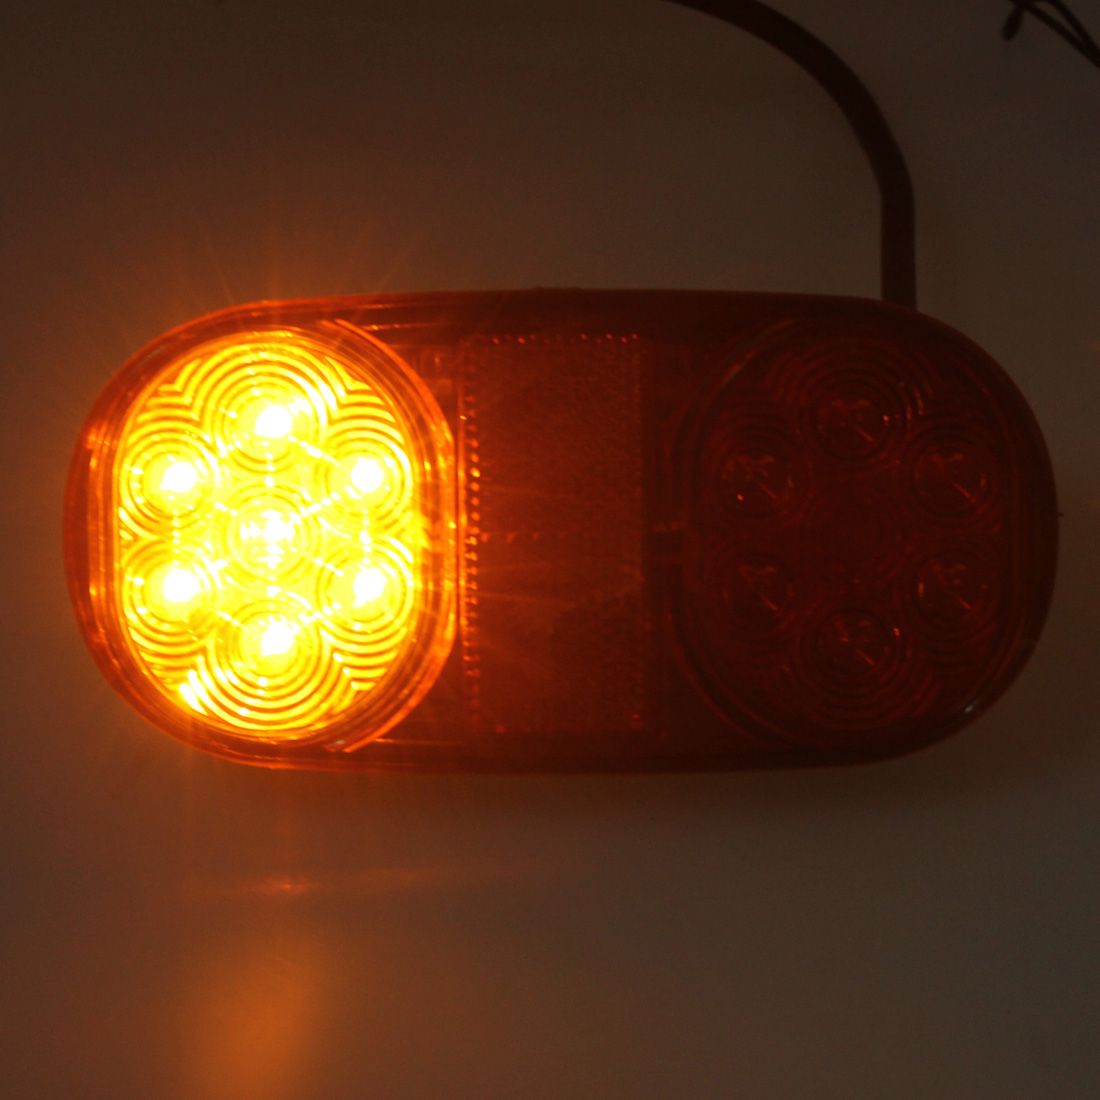 LED-Rear-Tail-Lights-Turn-Signal-Lamps-Waterproof-12V-2PCS-for-Boat-Trailer-UTE-Camper-Truck-55432